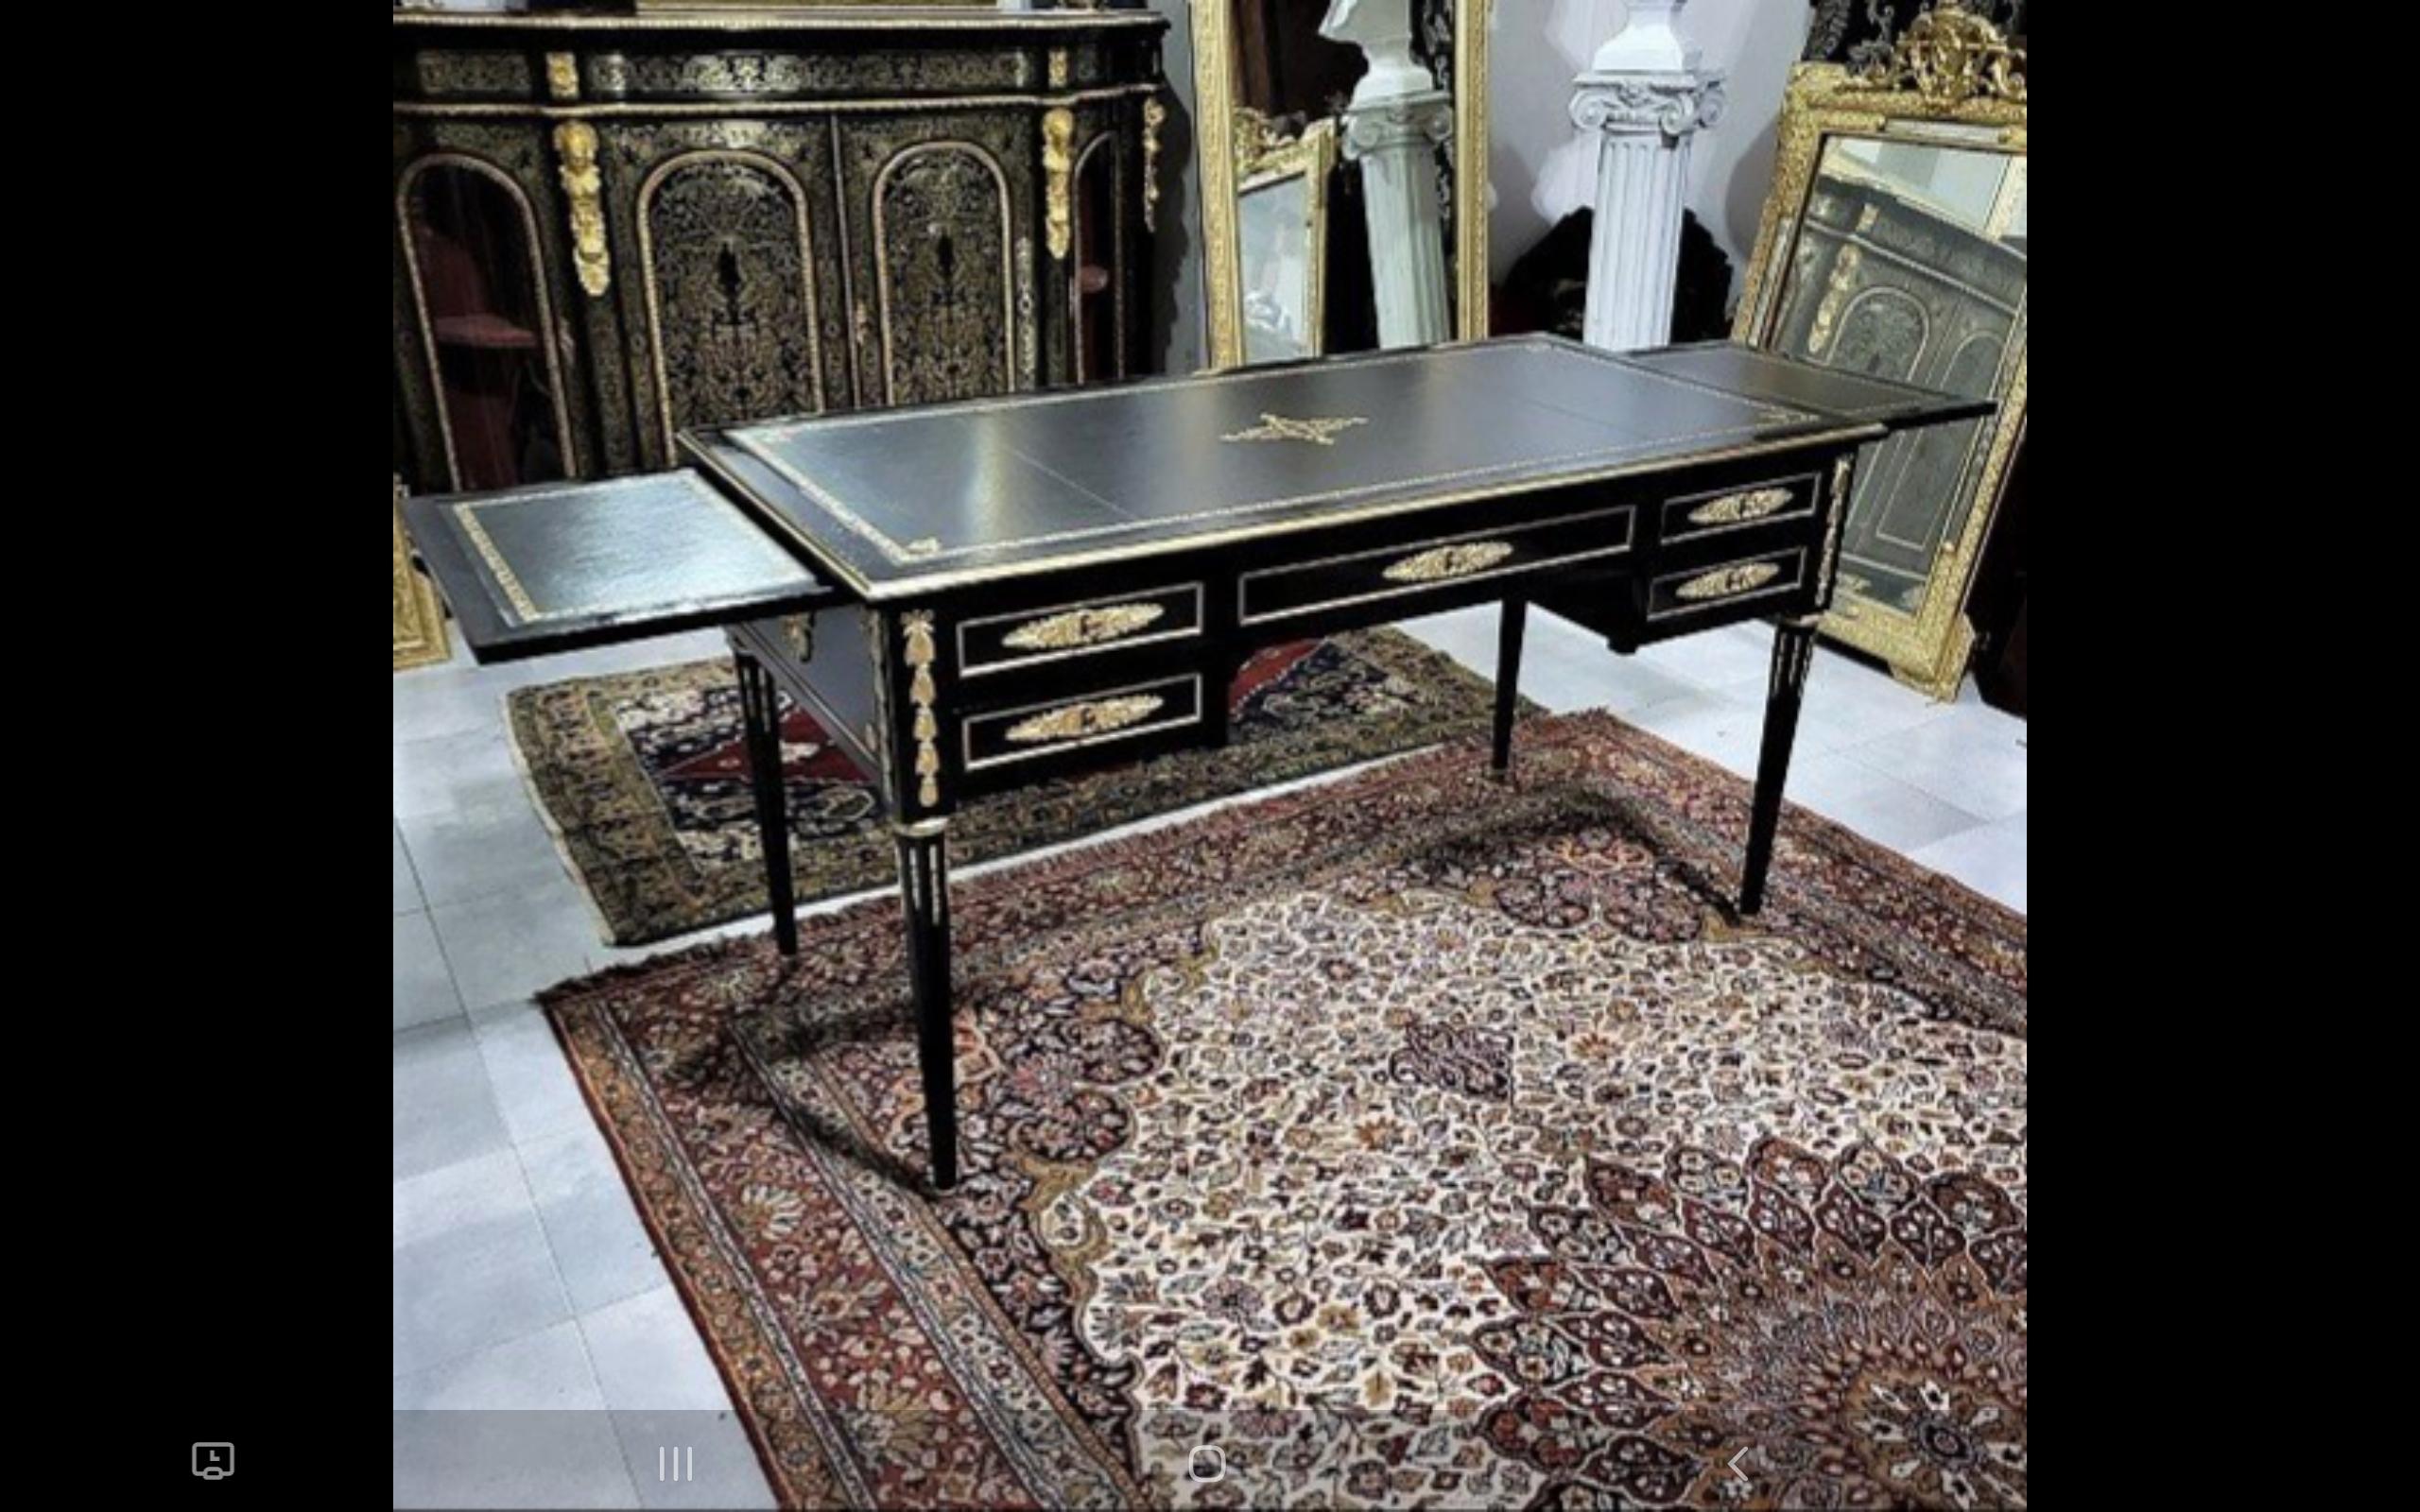 Beautiful black table desk with 2 side open parts to make it bigger, from the Napoleon III period.
Important ornamentation of gilded bronzes with ingot molds, patterns on the sides and spandrels, keyholes, hooves, asparagus, openwork gallery with